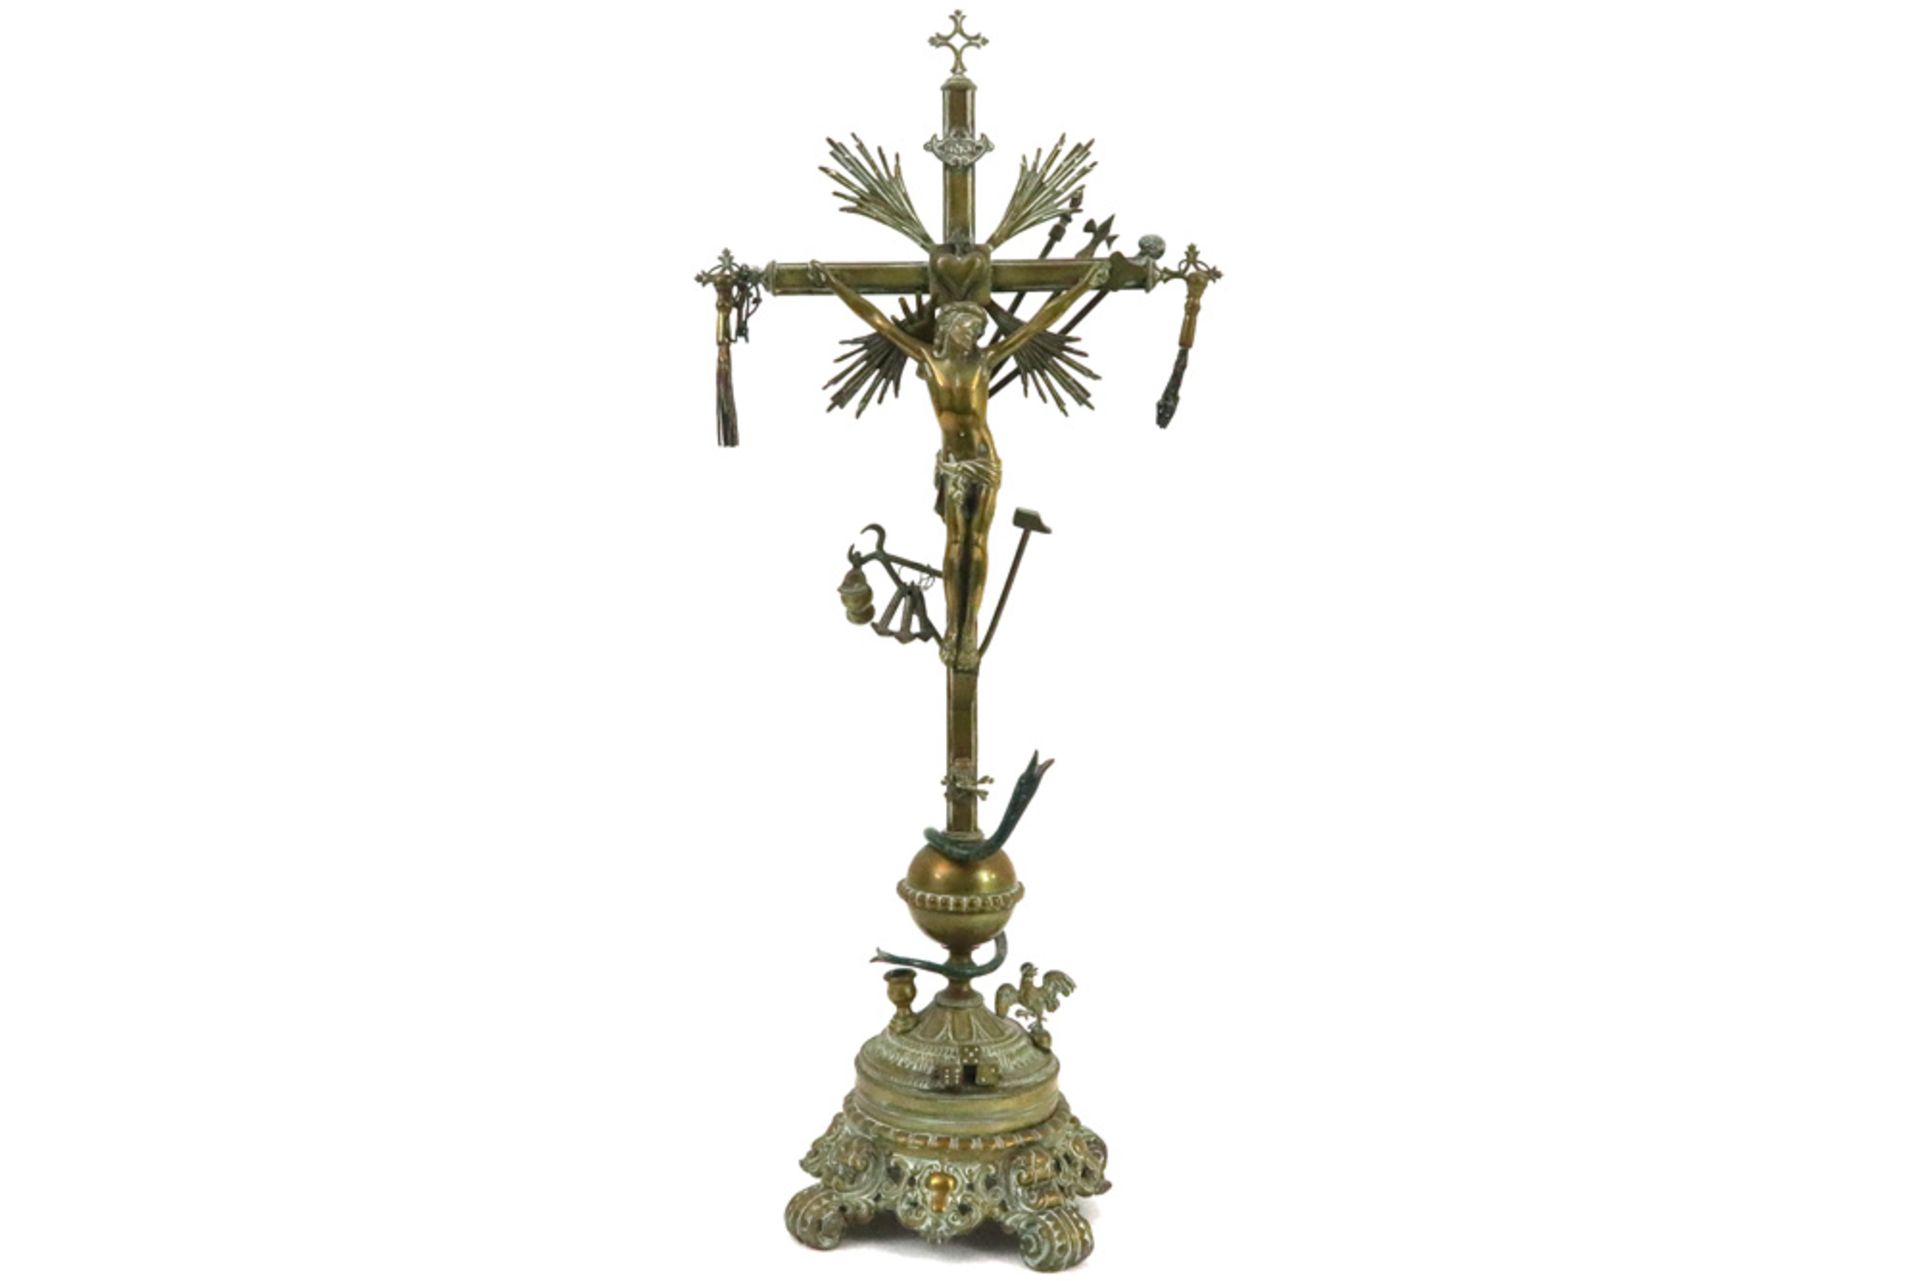 pair of antique gothic revival style candlesticks, a pair of 19th Cent. candlesticks and an - Image 2 of 5